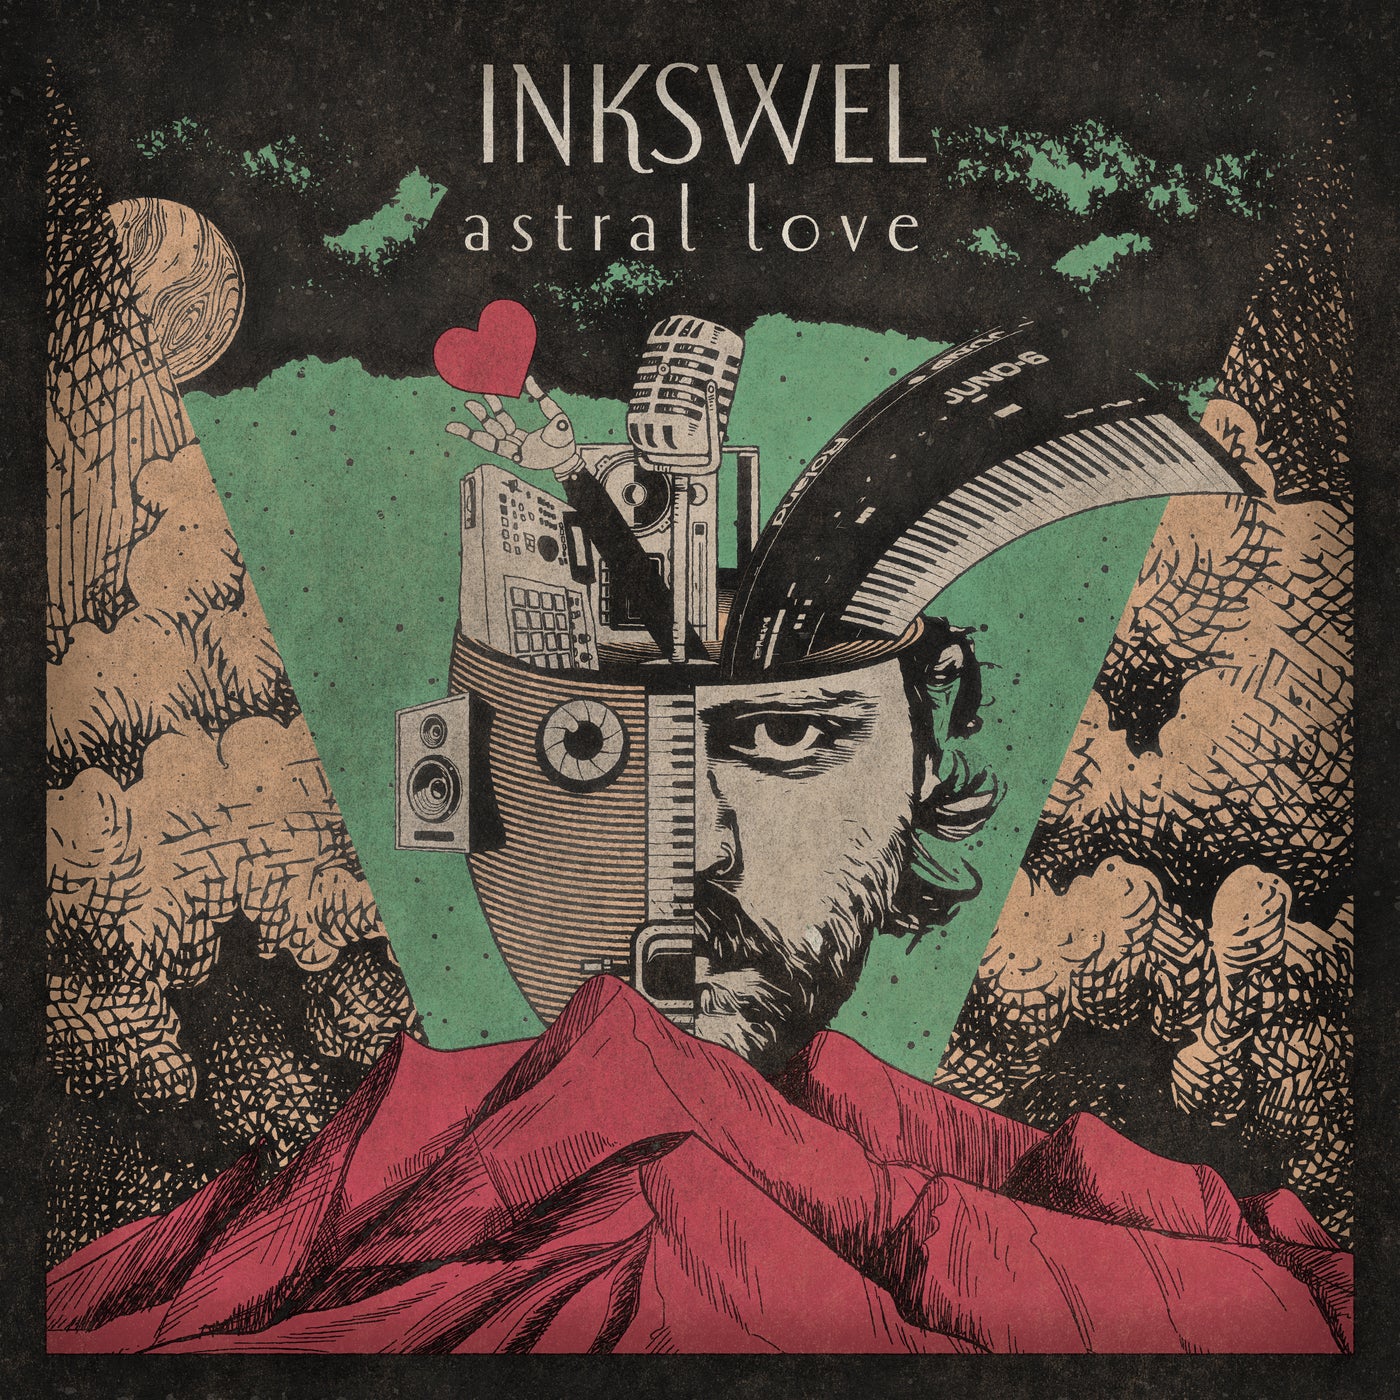 Inkswel – Astral Love (Deluxe Edition) [ARC196AD]